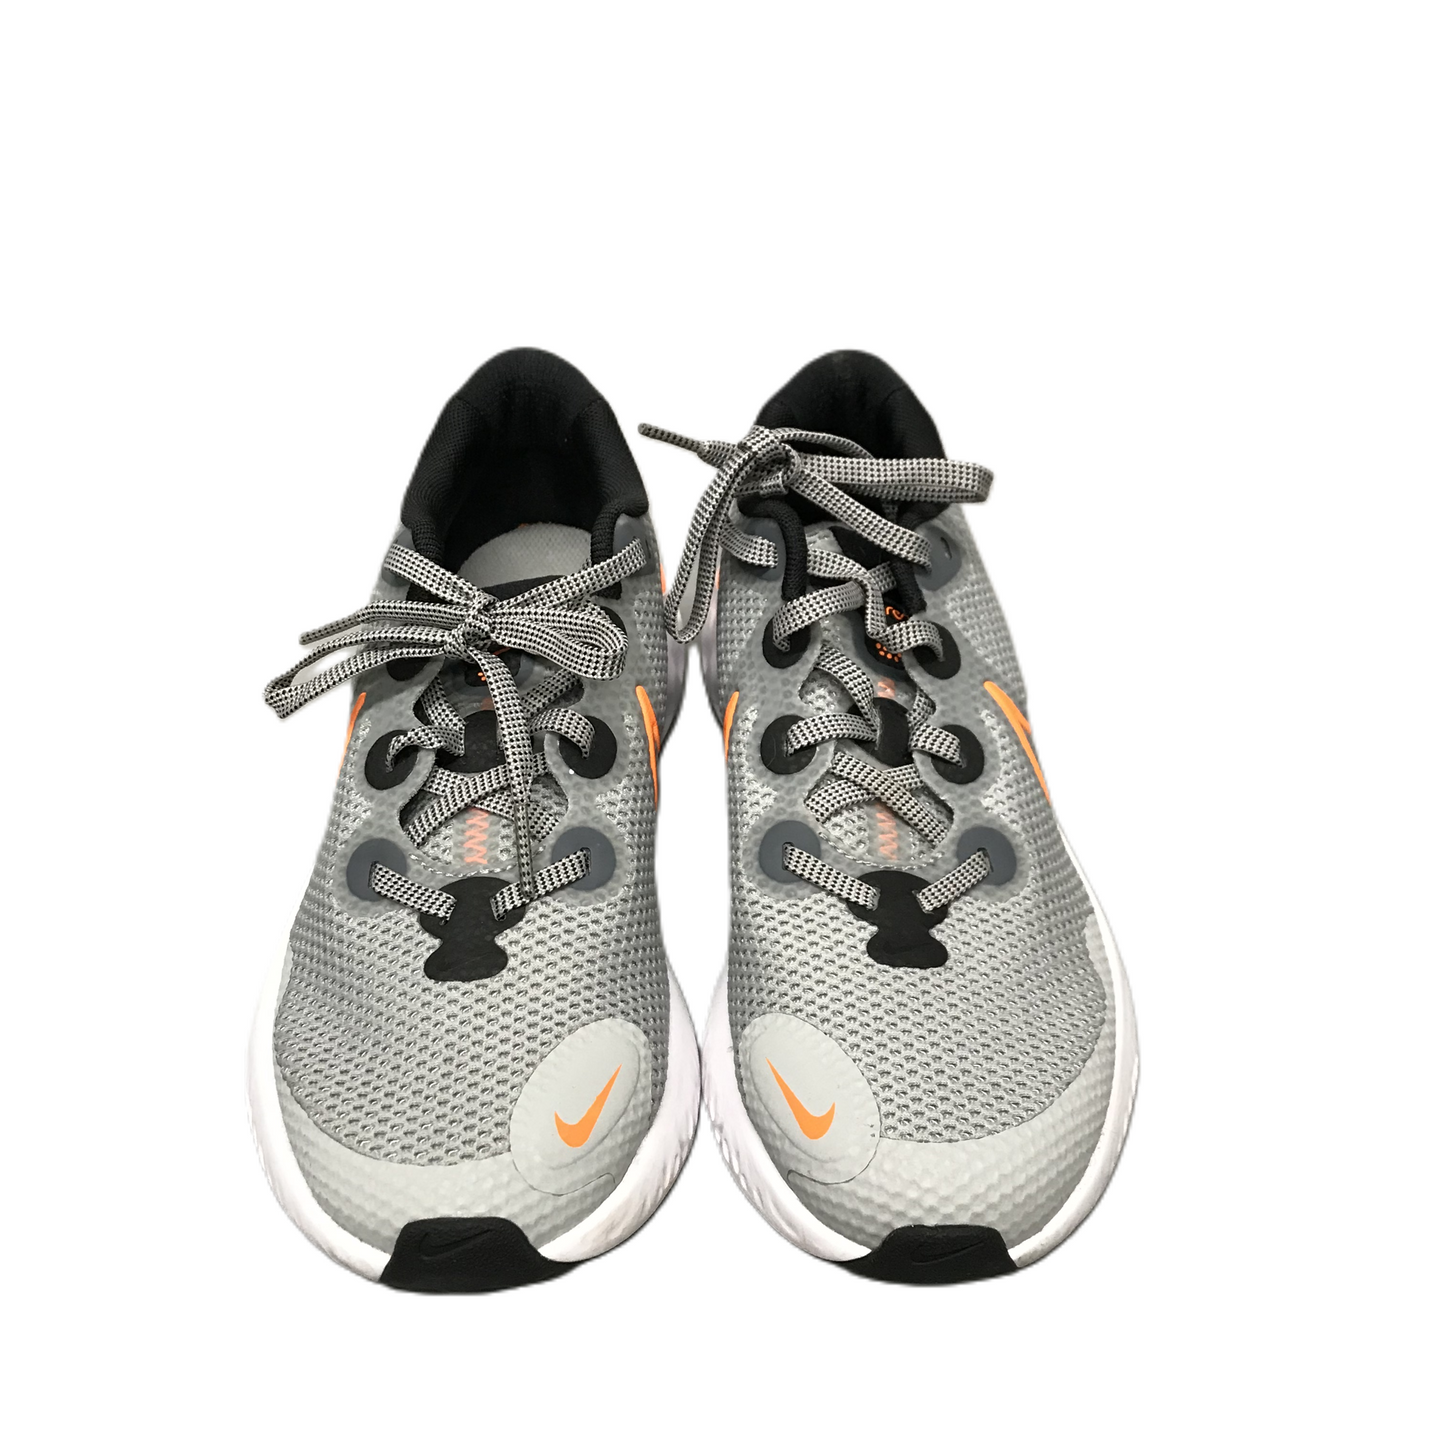 Grey Shoes Athletic By Nike, Size: 6